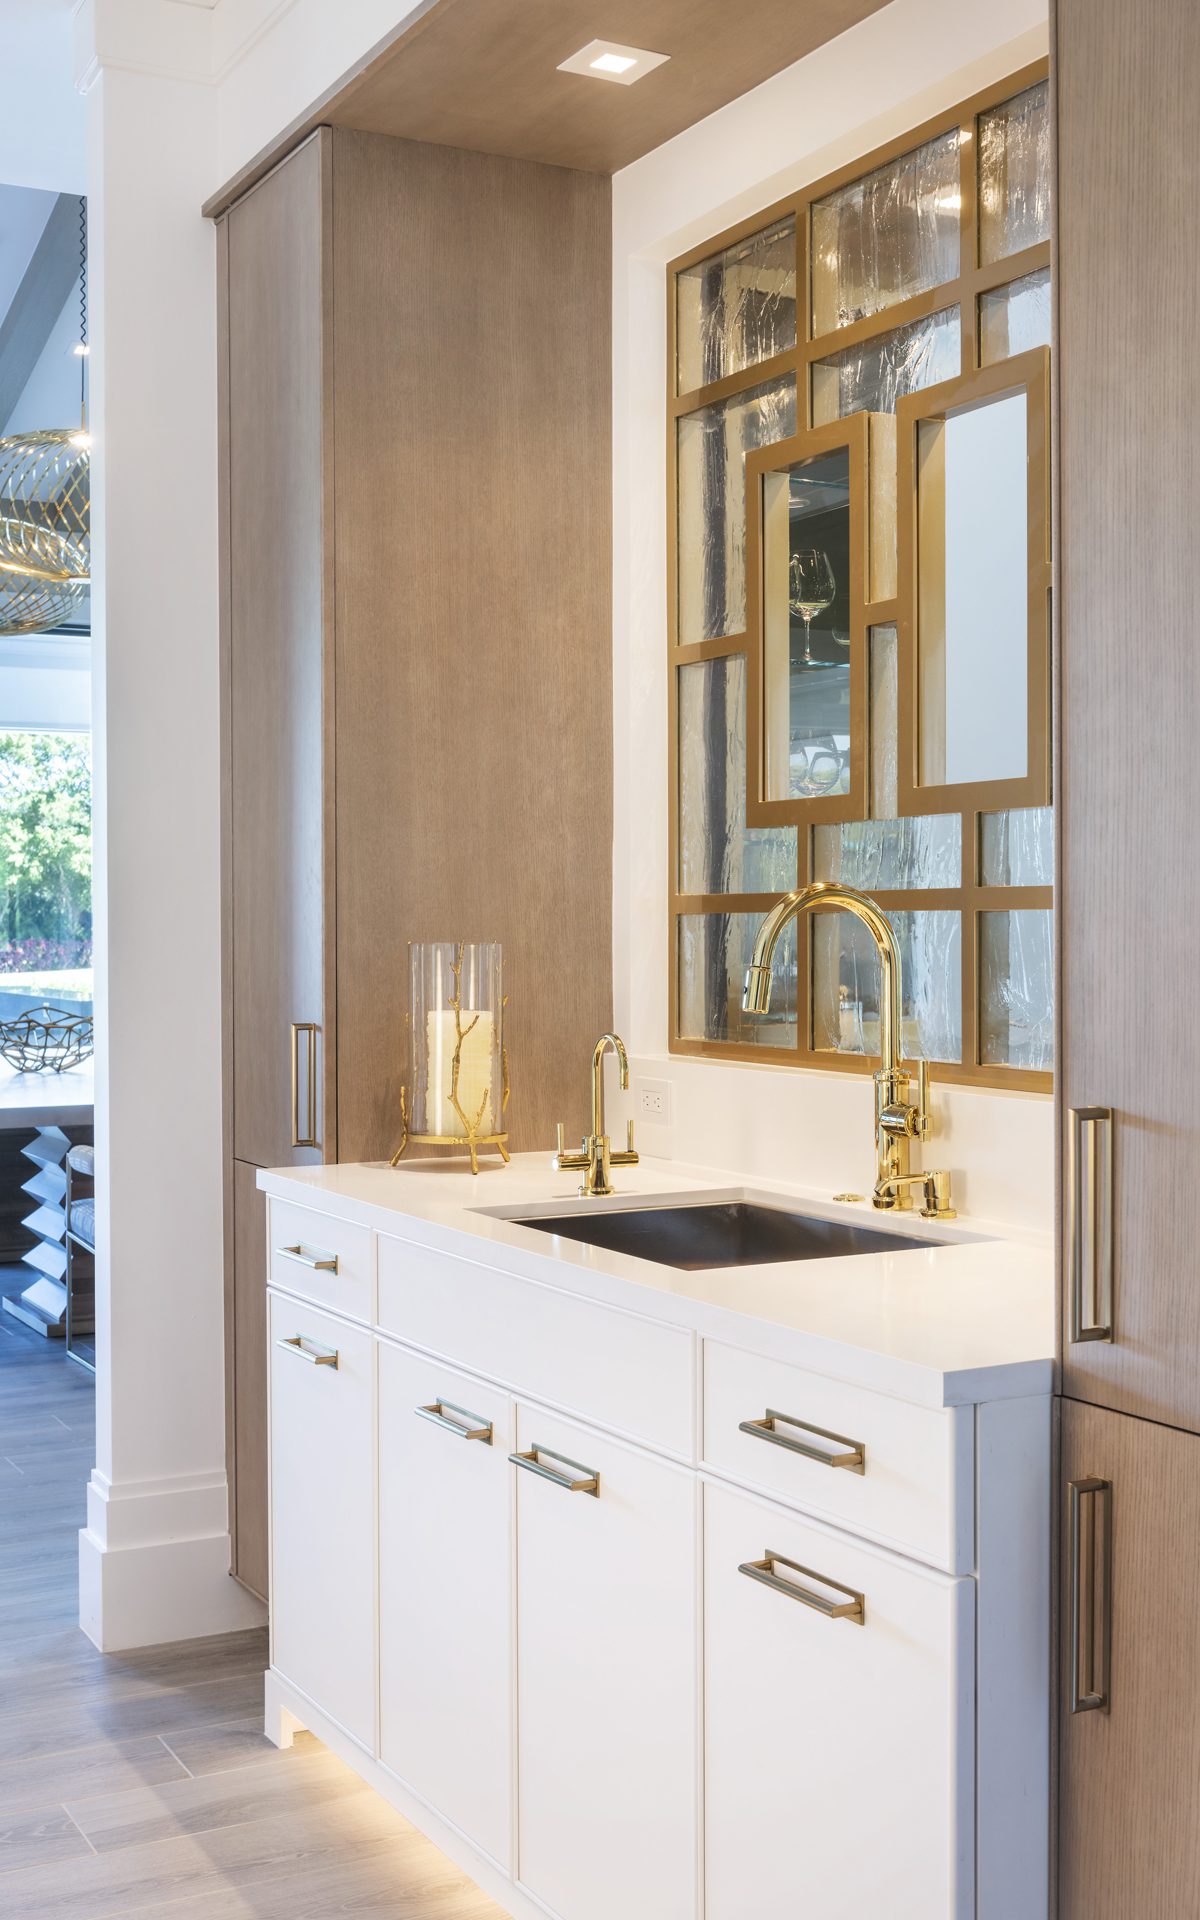 Image of contemporary bar area with white cabinetry, gold accents, and mirrored and gold backdrop.